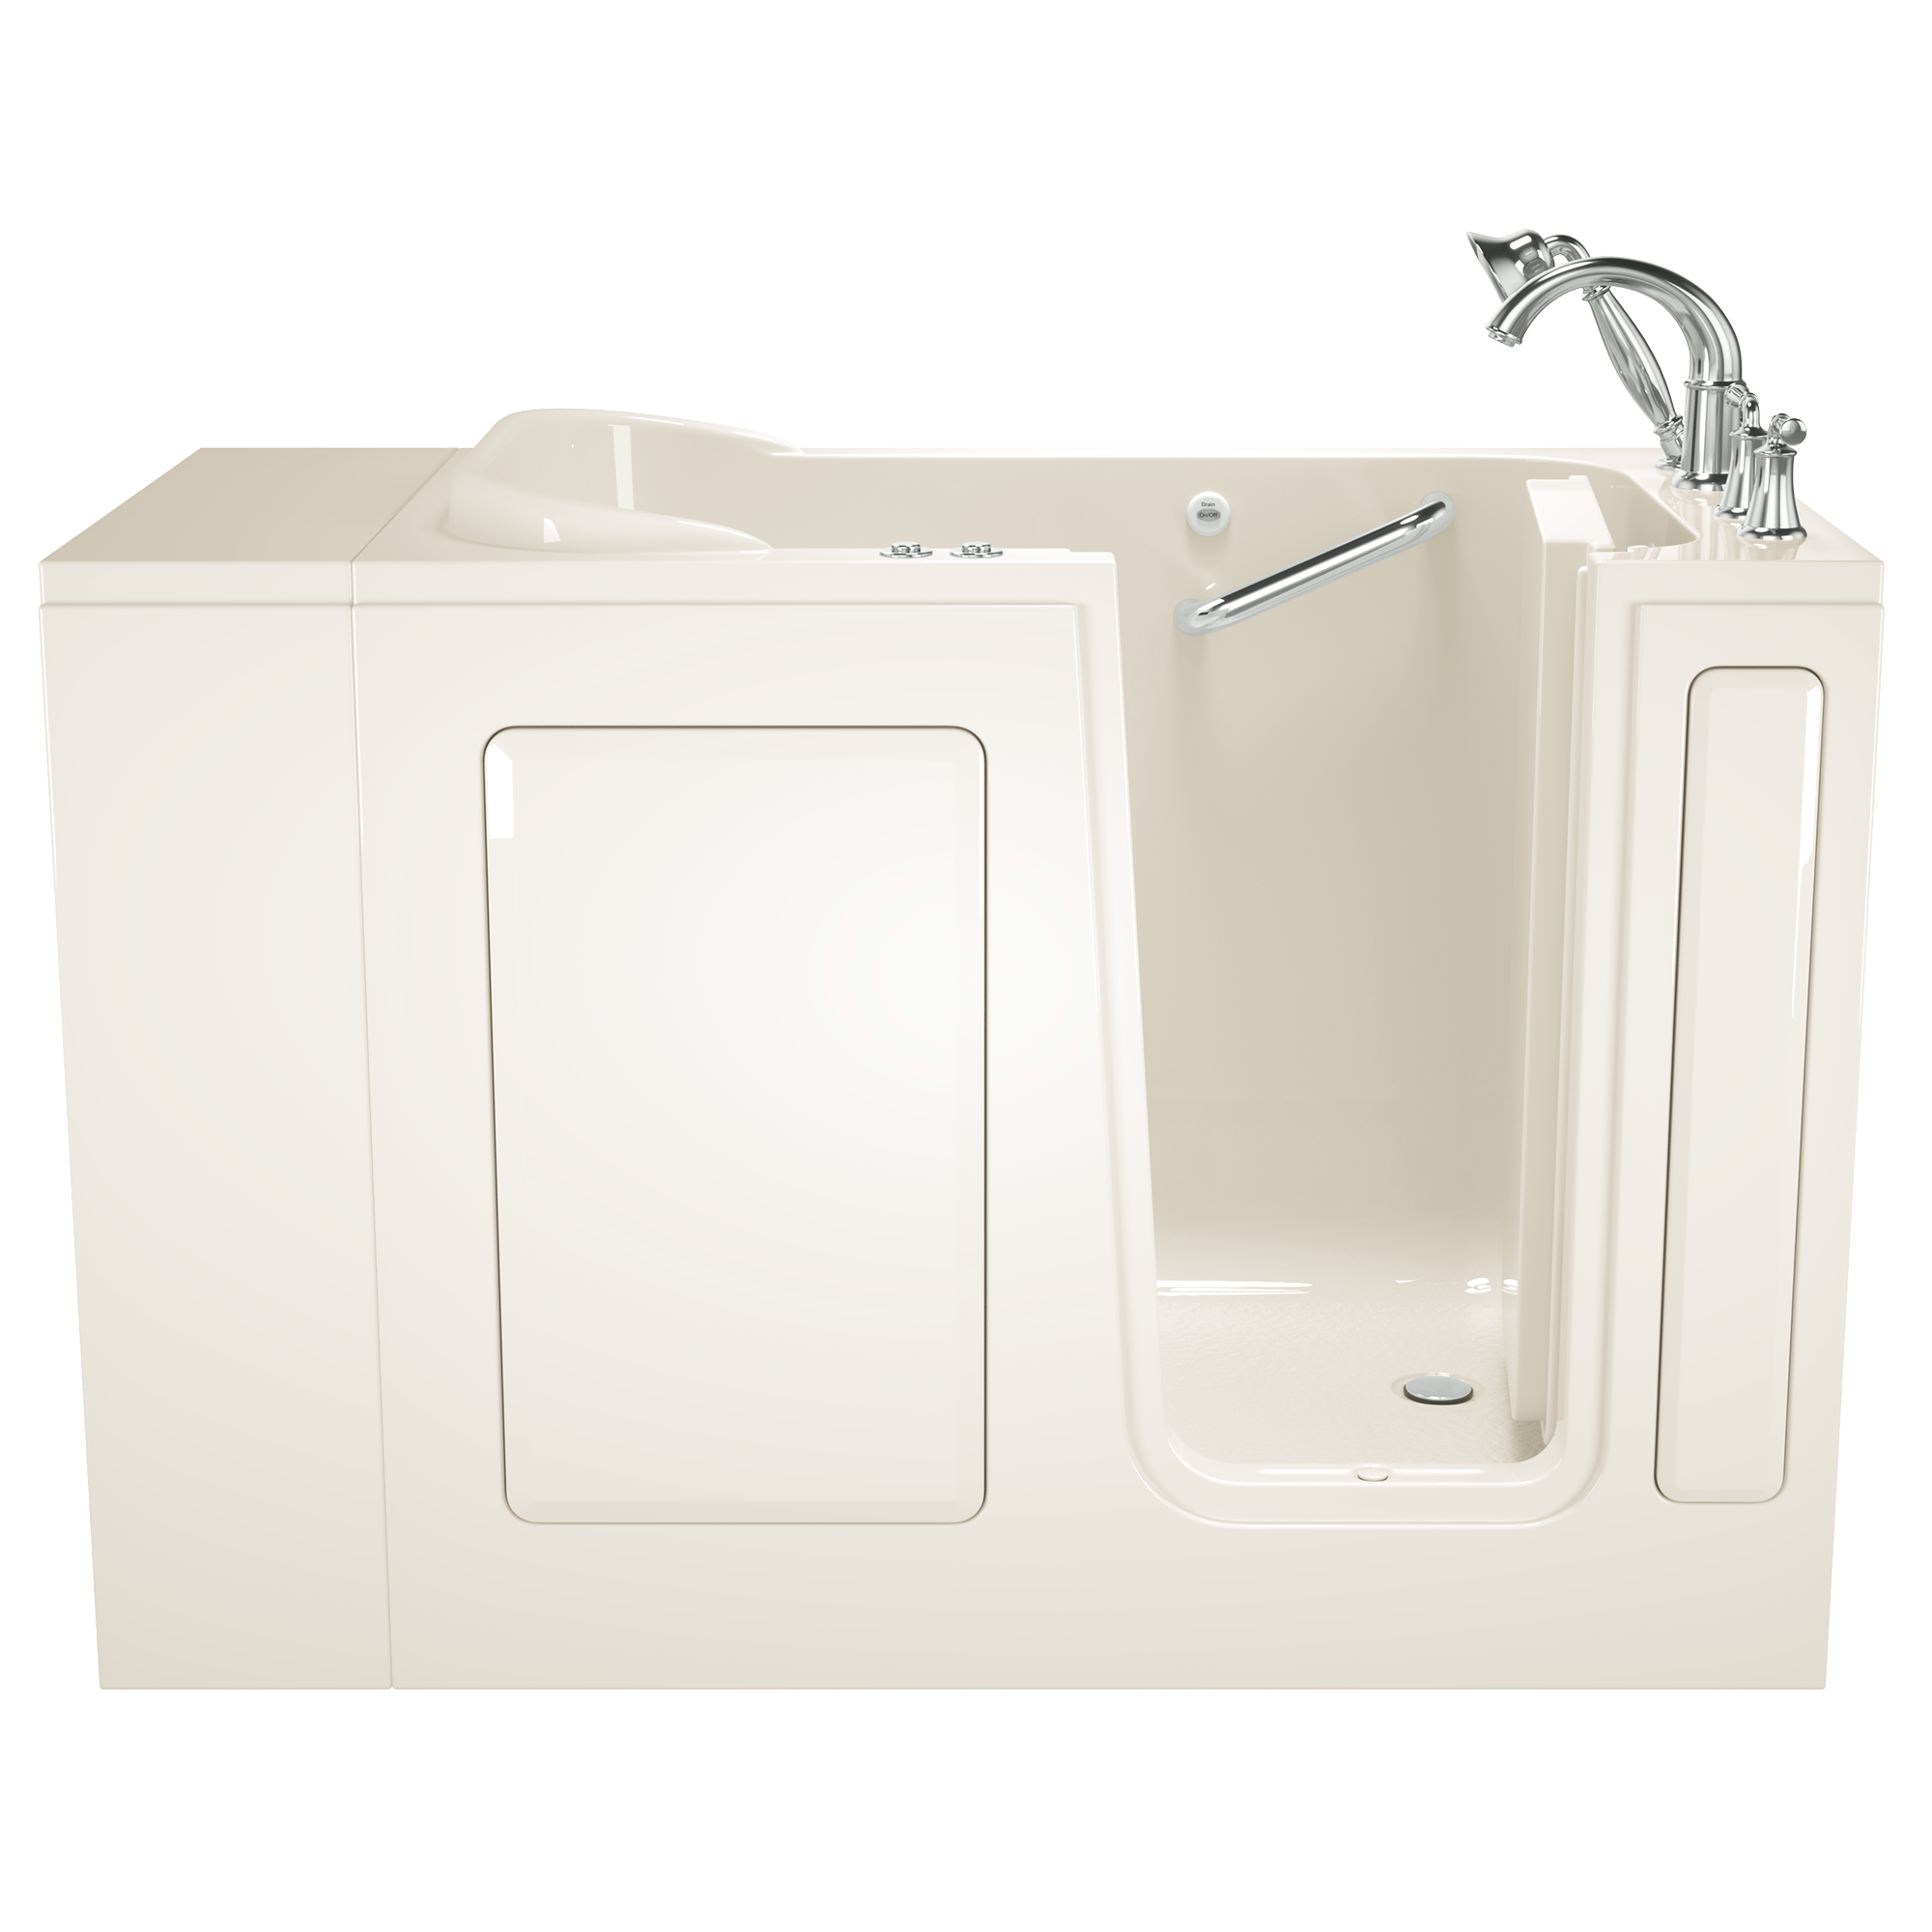 Gelcoat Value Series 28x48-Inch Walk-in Bathtub with Combination Air Spa and Whirlpool System  Right Hand Door and Drain